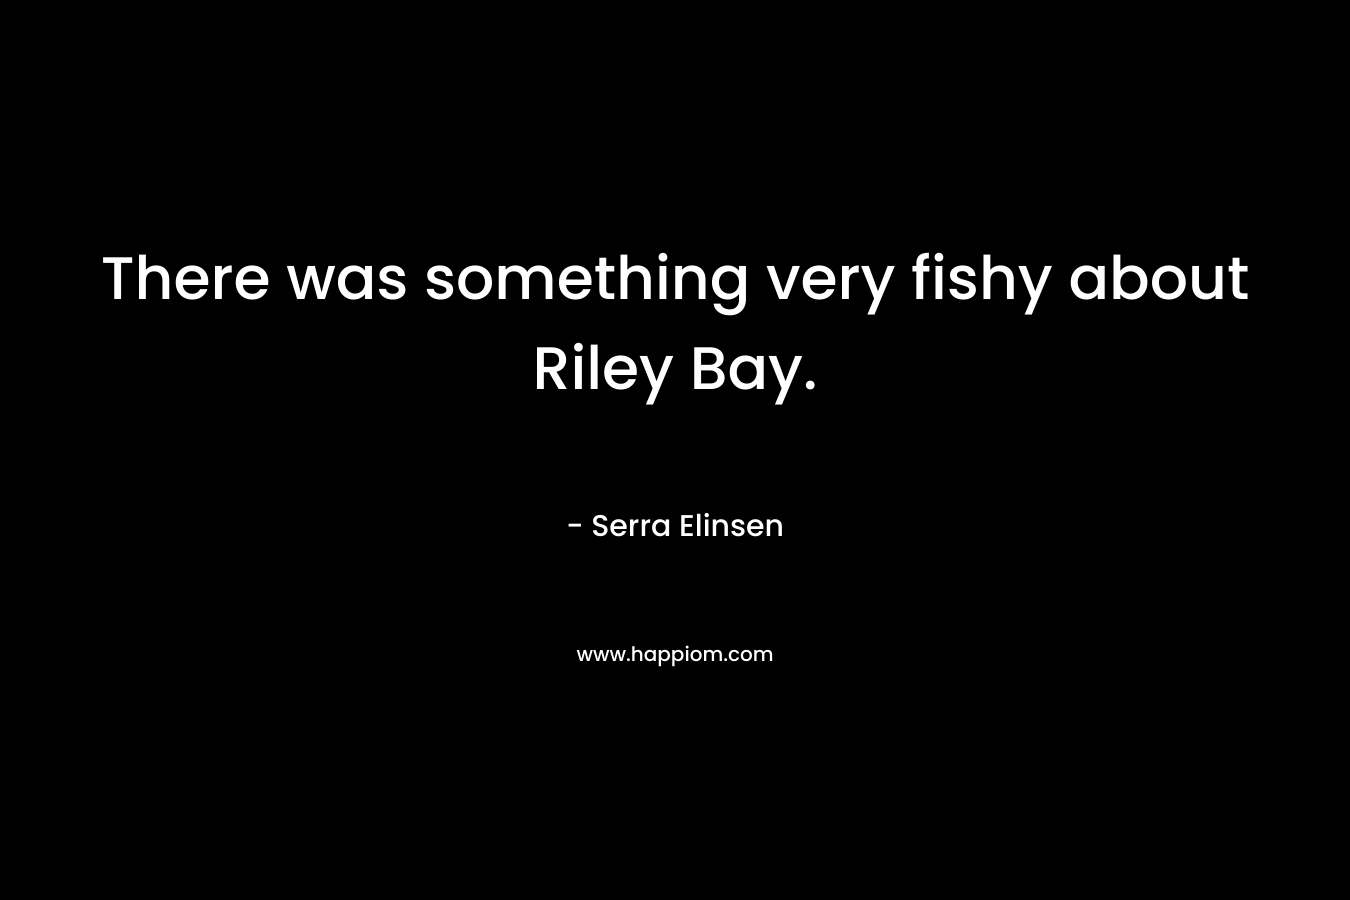 There was something very fishy about Riley Bay. – Serra Elinsen